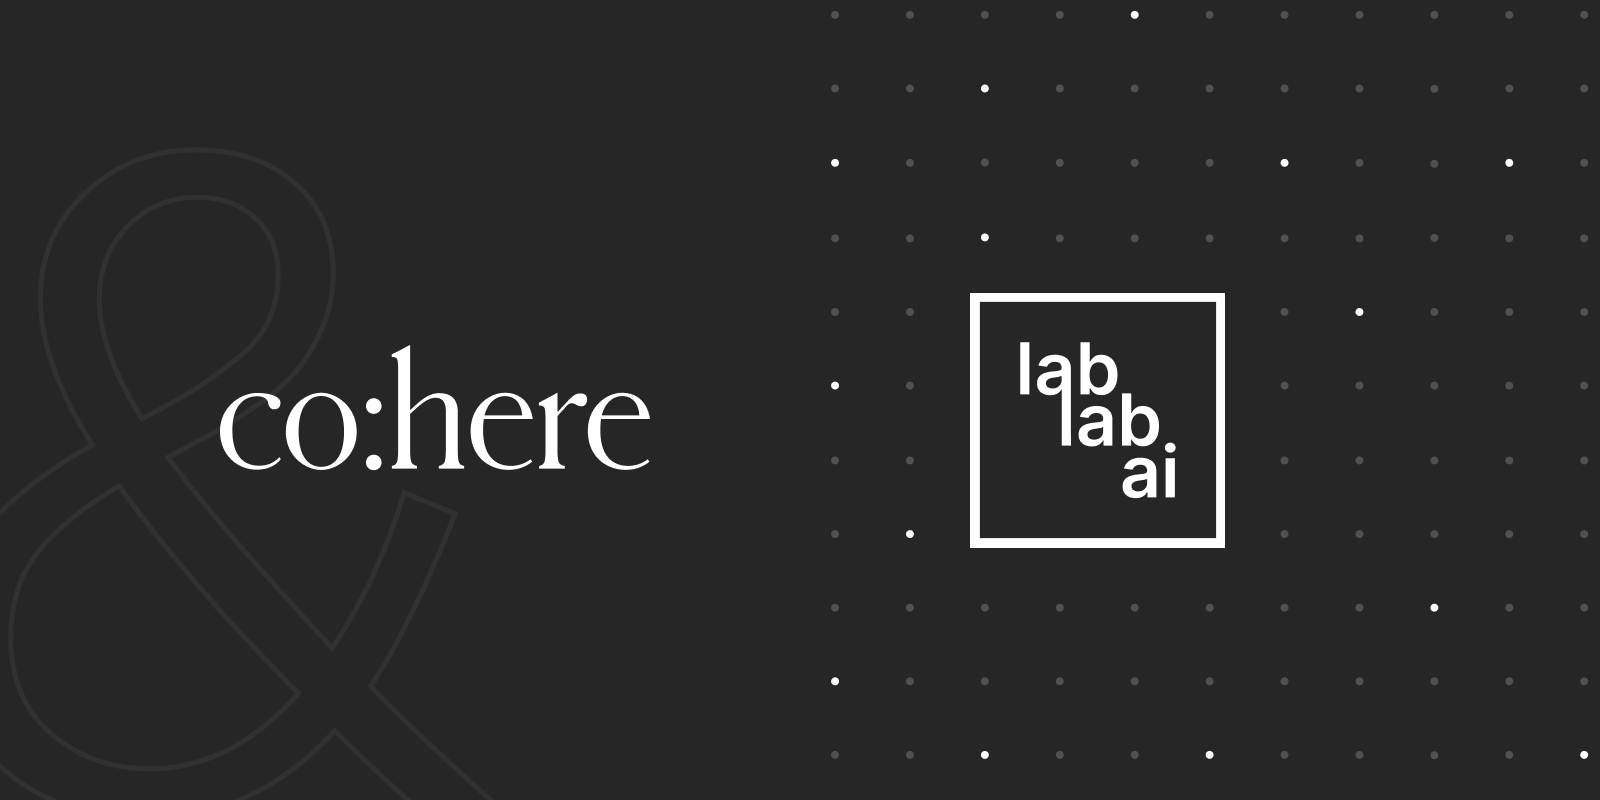 LABLAB.ai partners with Cohere to host a series of AI Hackathons